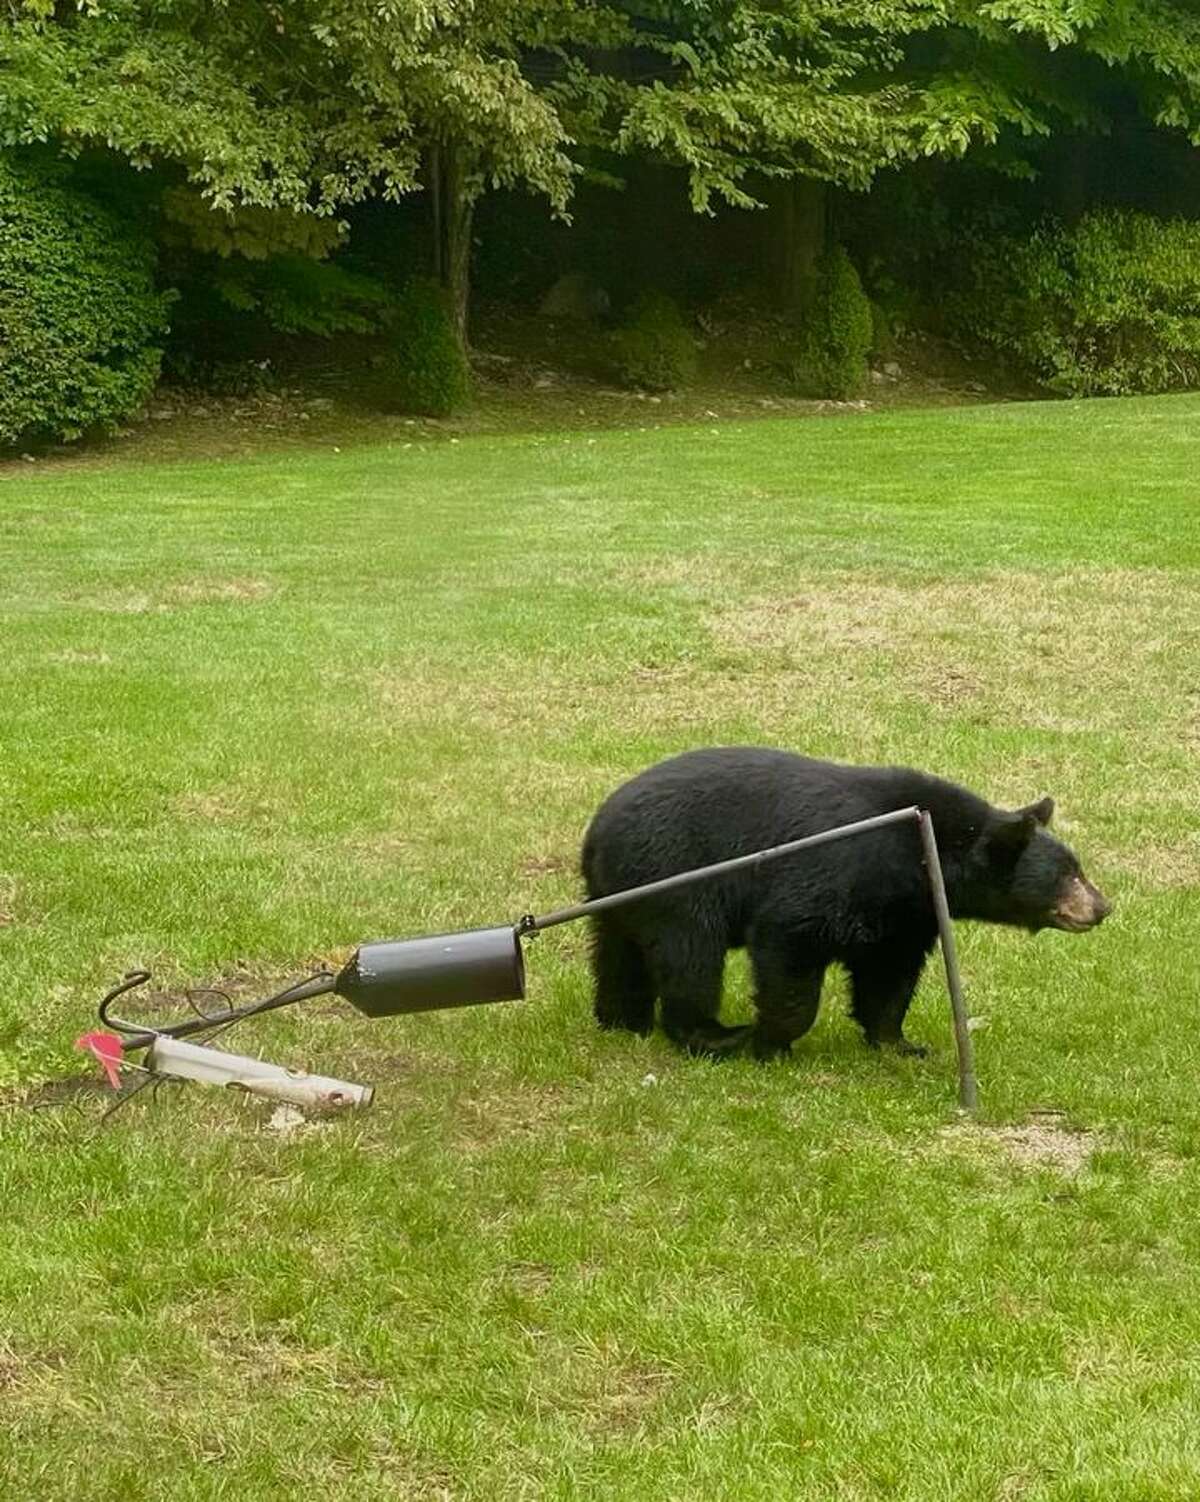 Black bears sightings on North Wilton Road were reported to animal control officers Tuesday and Wednesday, according to New Canaan police.